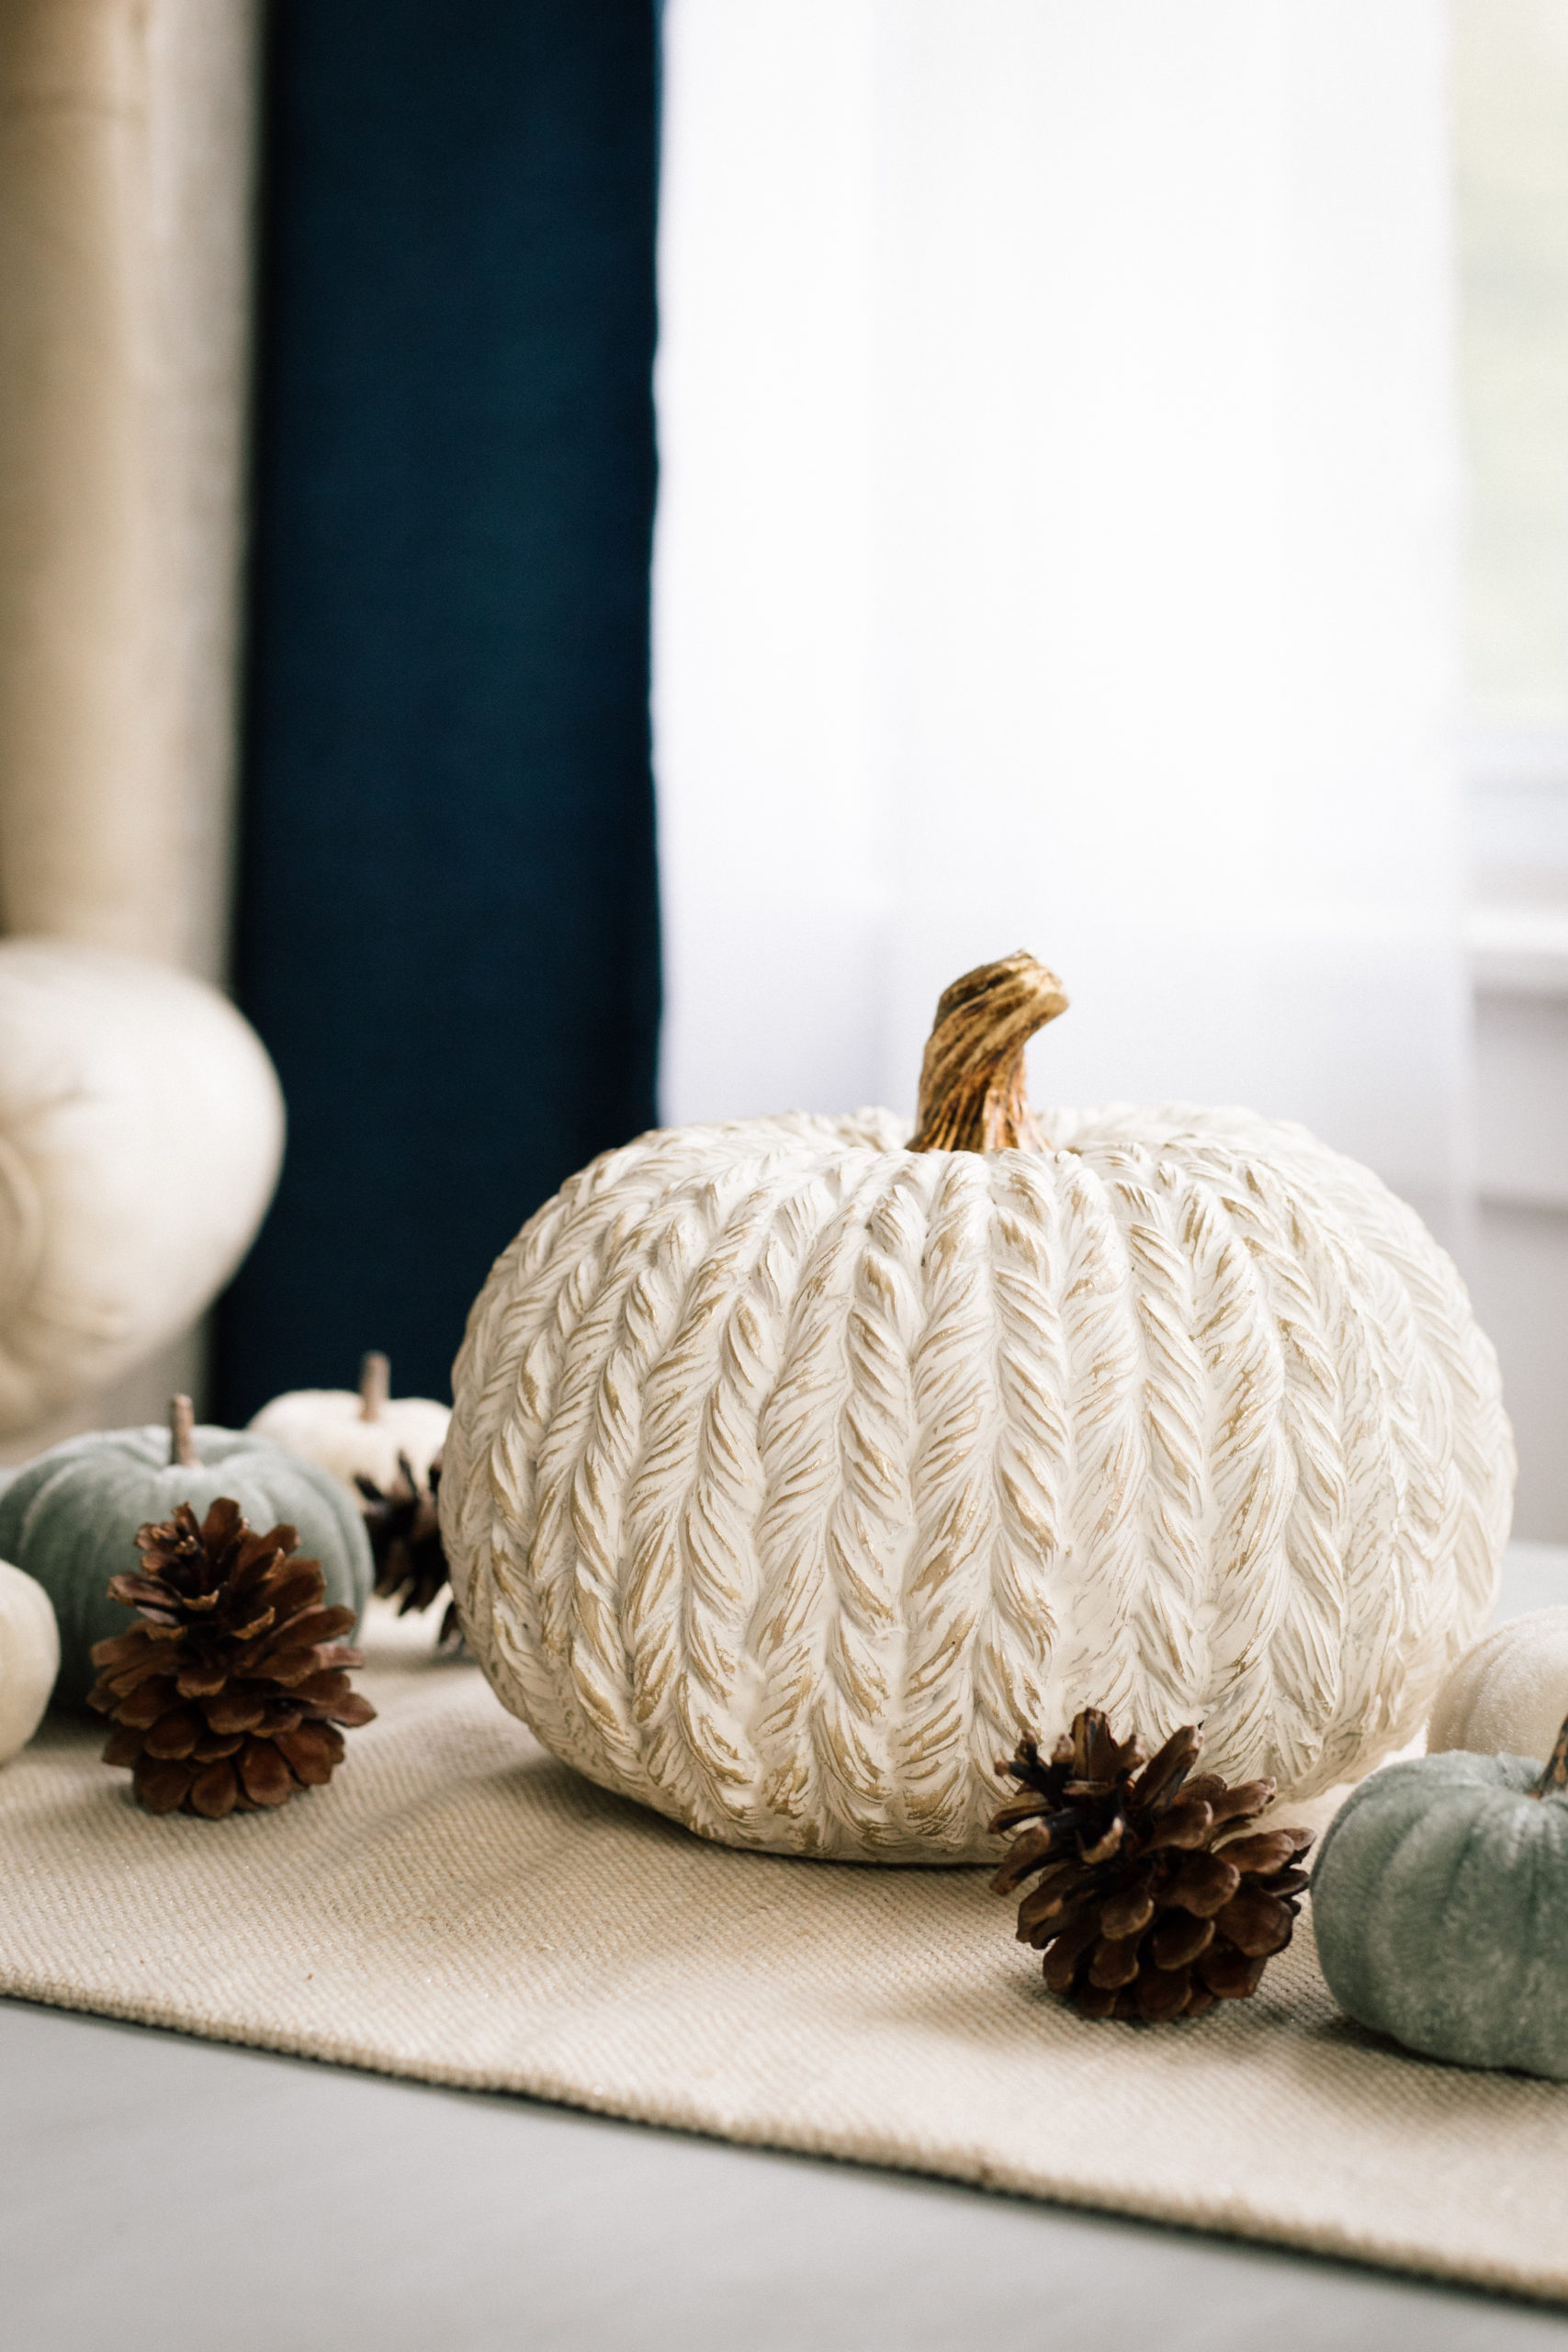 Classy Halloween Decorations for an Elegant Fall Home - Allyn Lewis